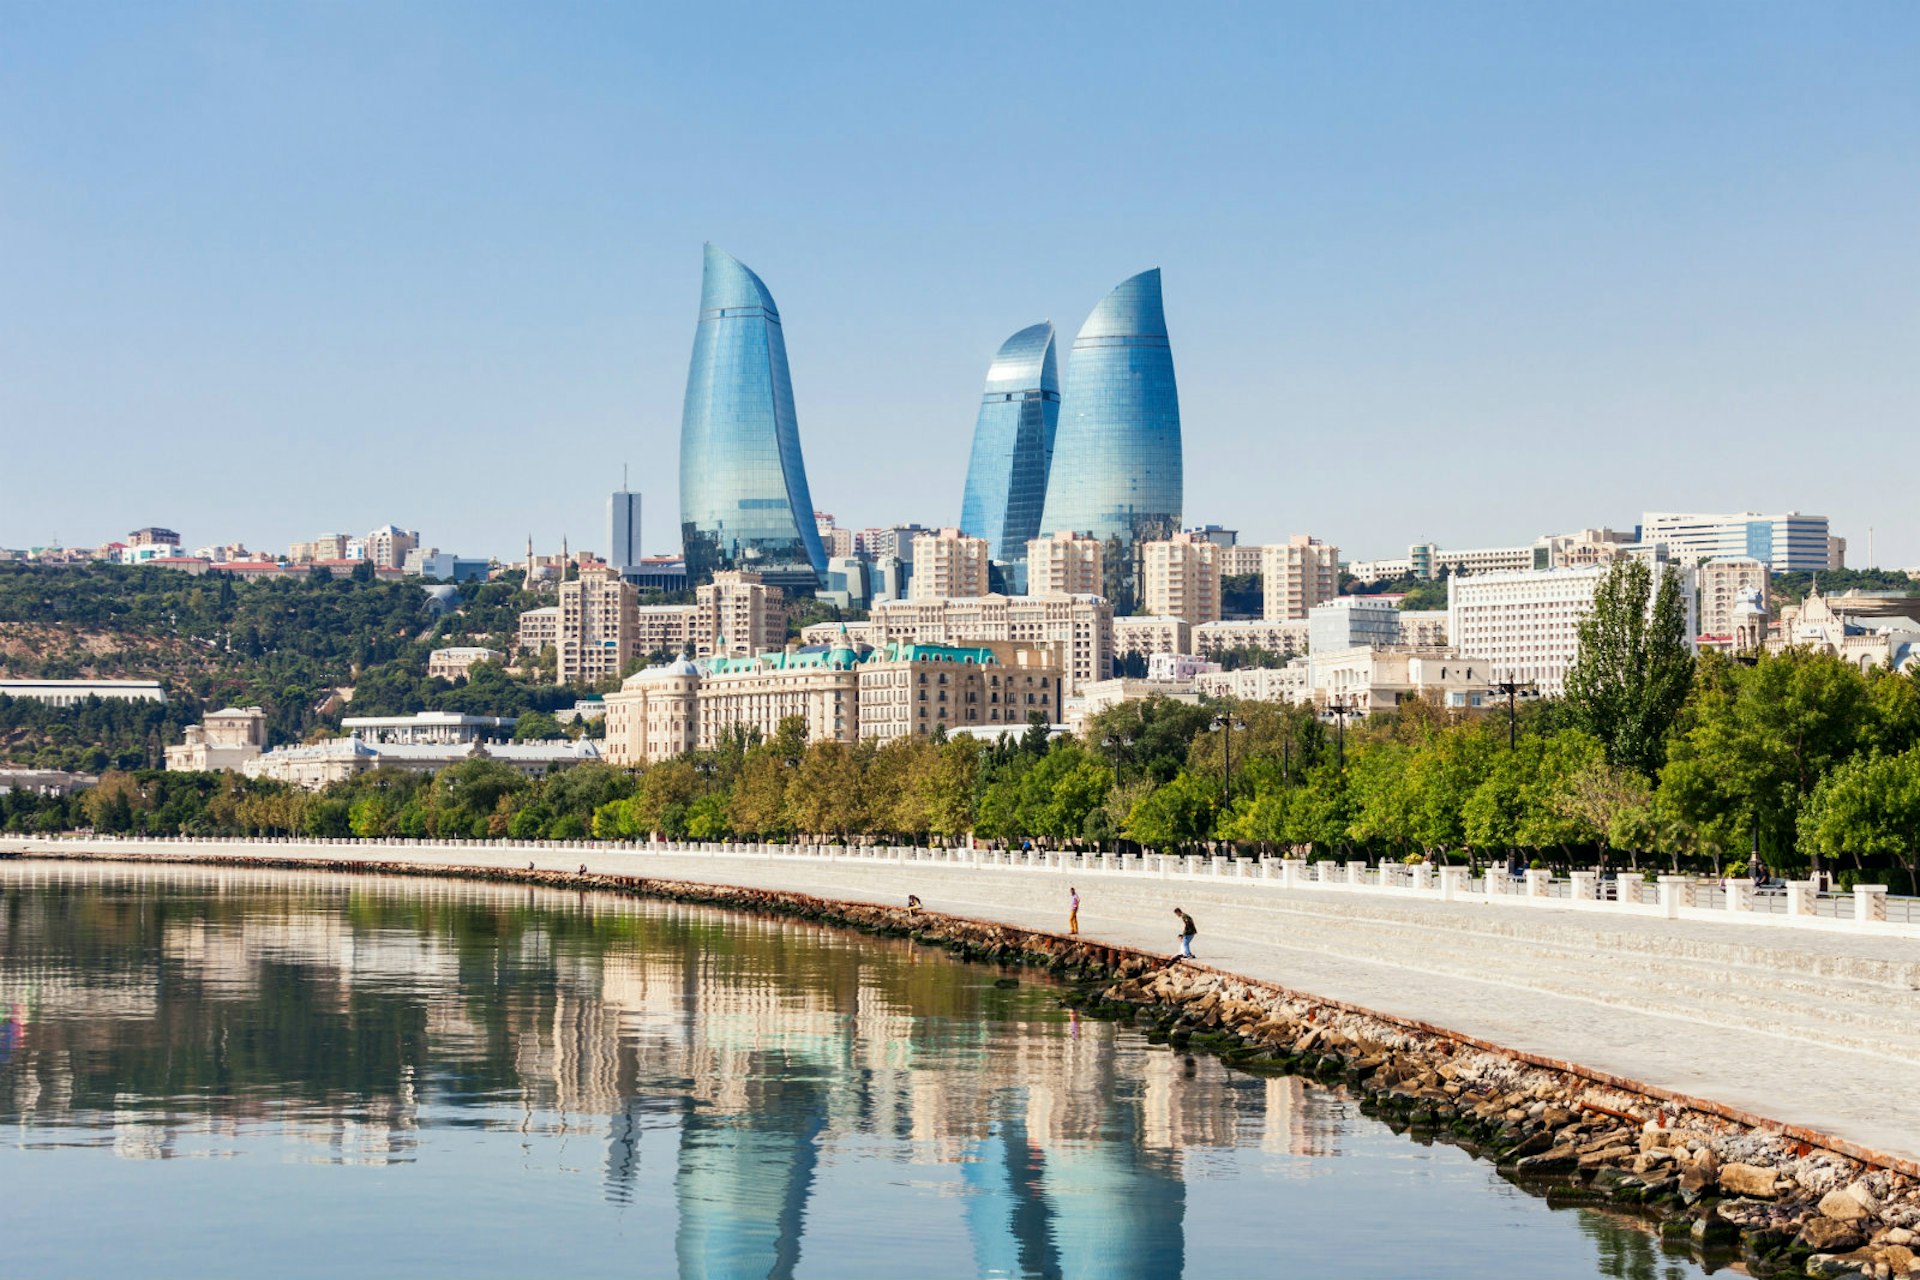 Cities for architecture lovers - Baku's flame towers, Azerbaijan